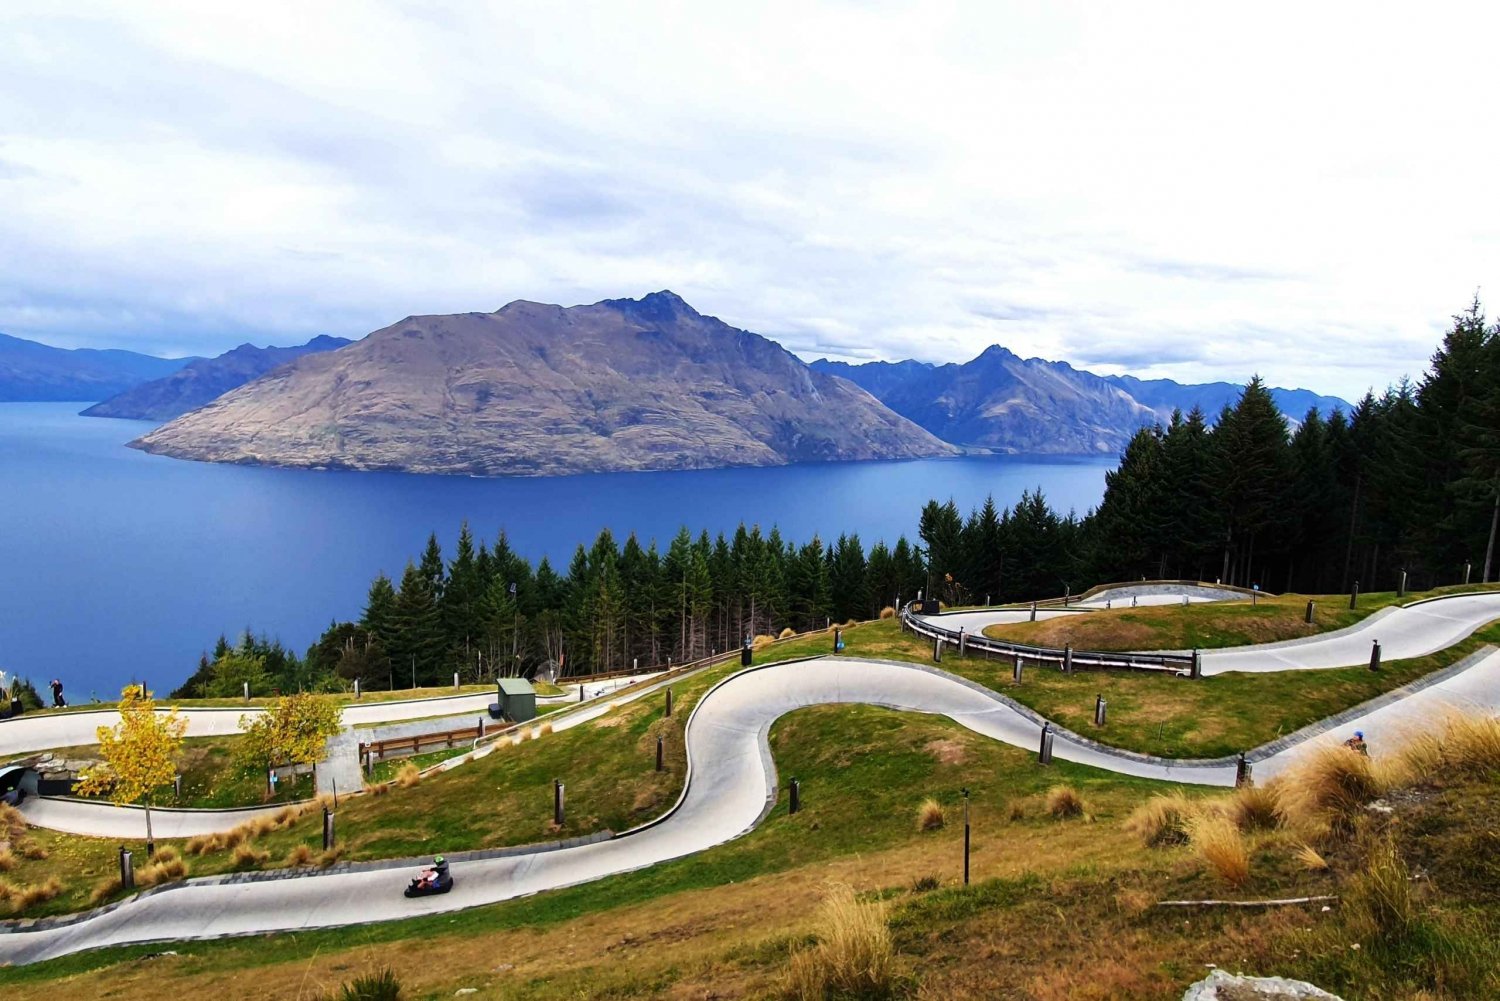 6 Day NZ South Island Private Tour from Auckland